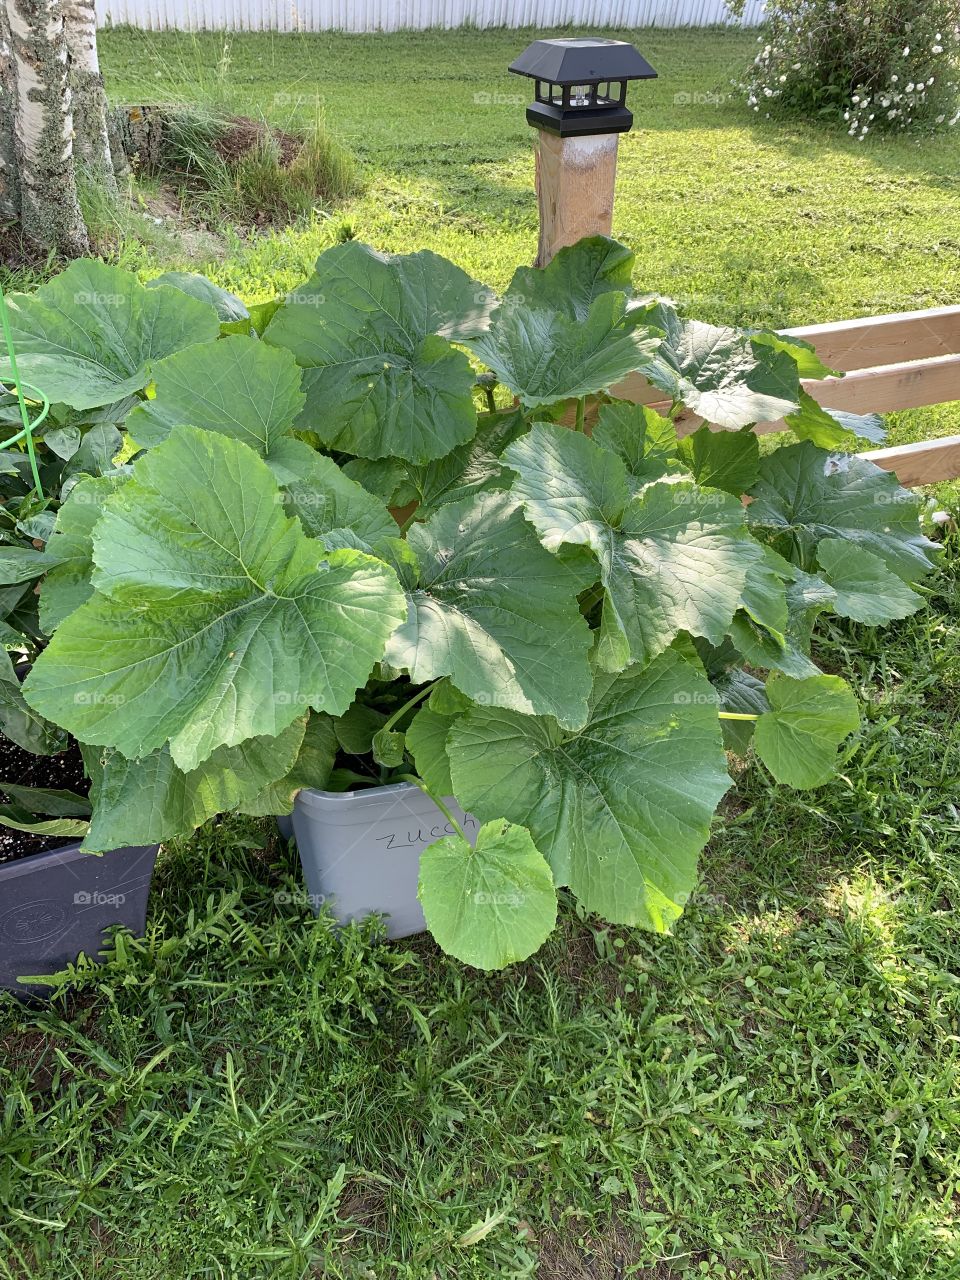 Have you ever considered growing your zucchini in a bin? This is our first year trying our bin garden and the zucchini is growing fantastic. 